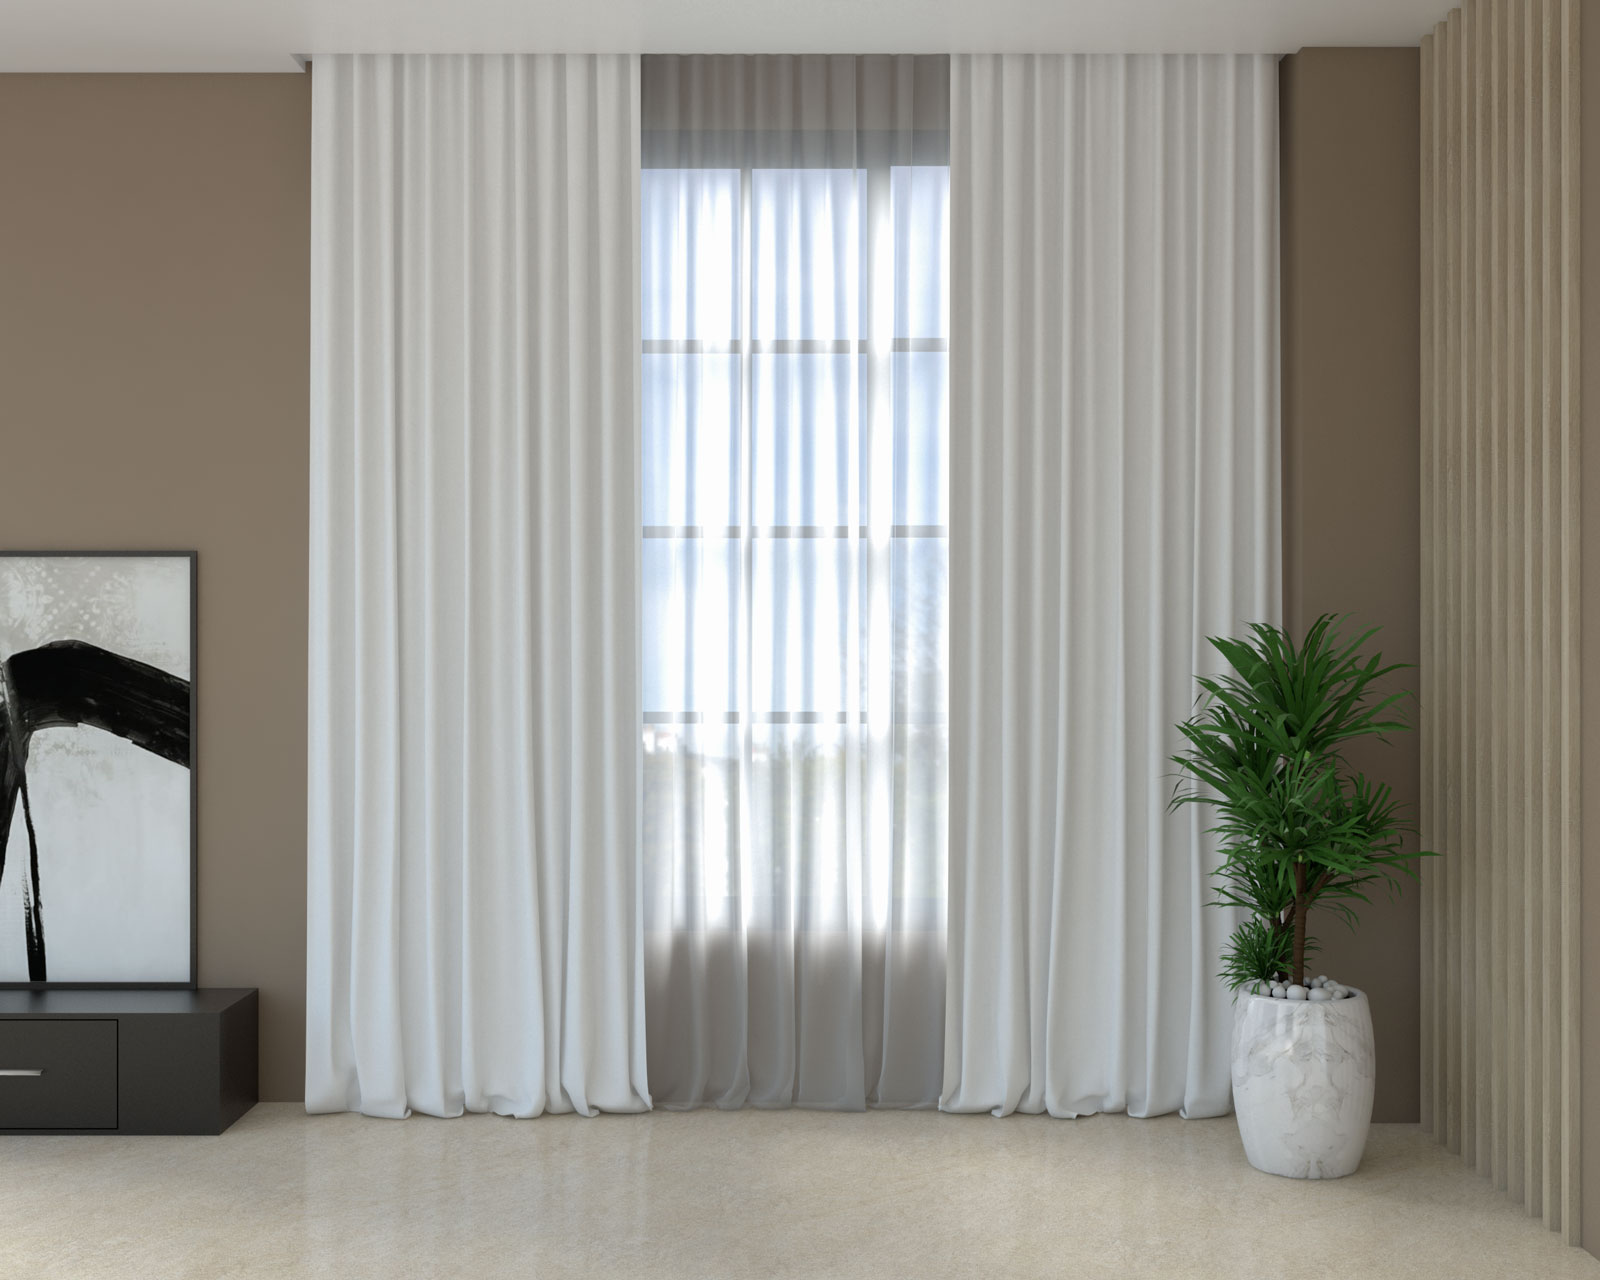 Brown walls with white curtains